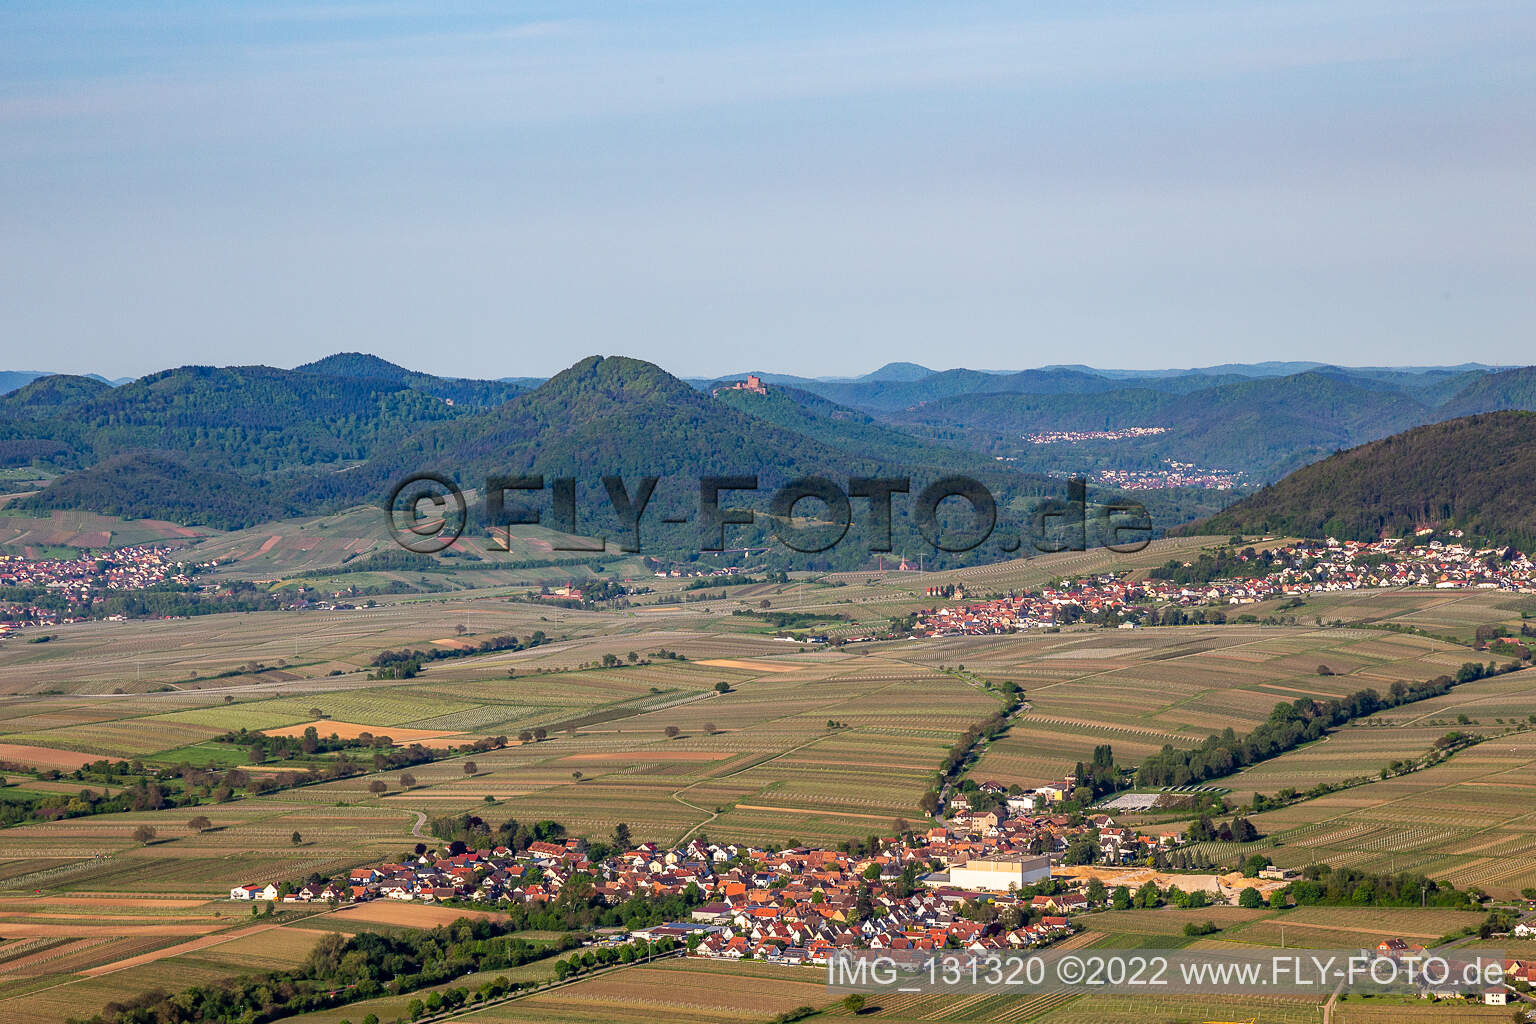 Böchingen in the state Rhineland-Palatinate, Germany from the drone perspective